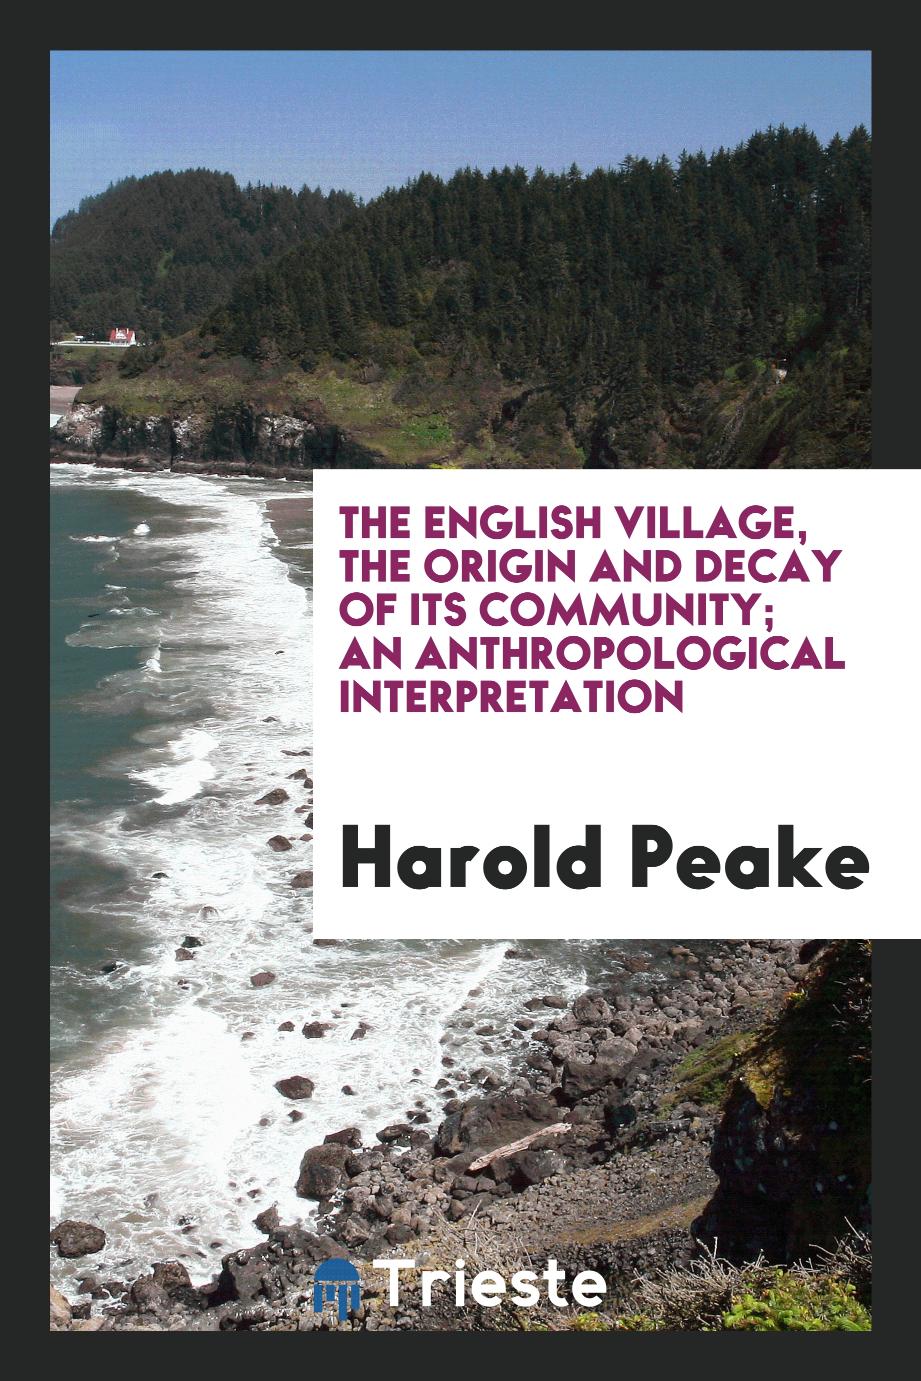 The English village, the origin and decay of its community; an anthropological interpretation